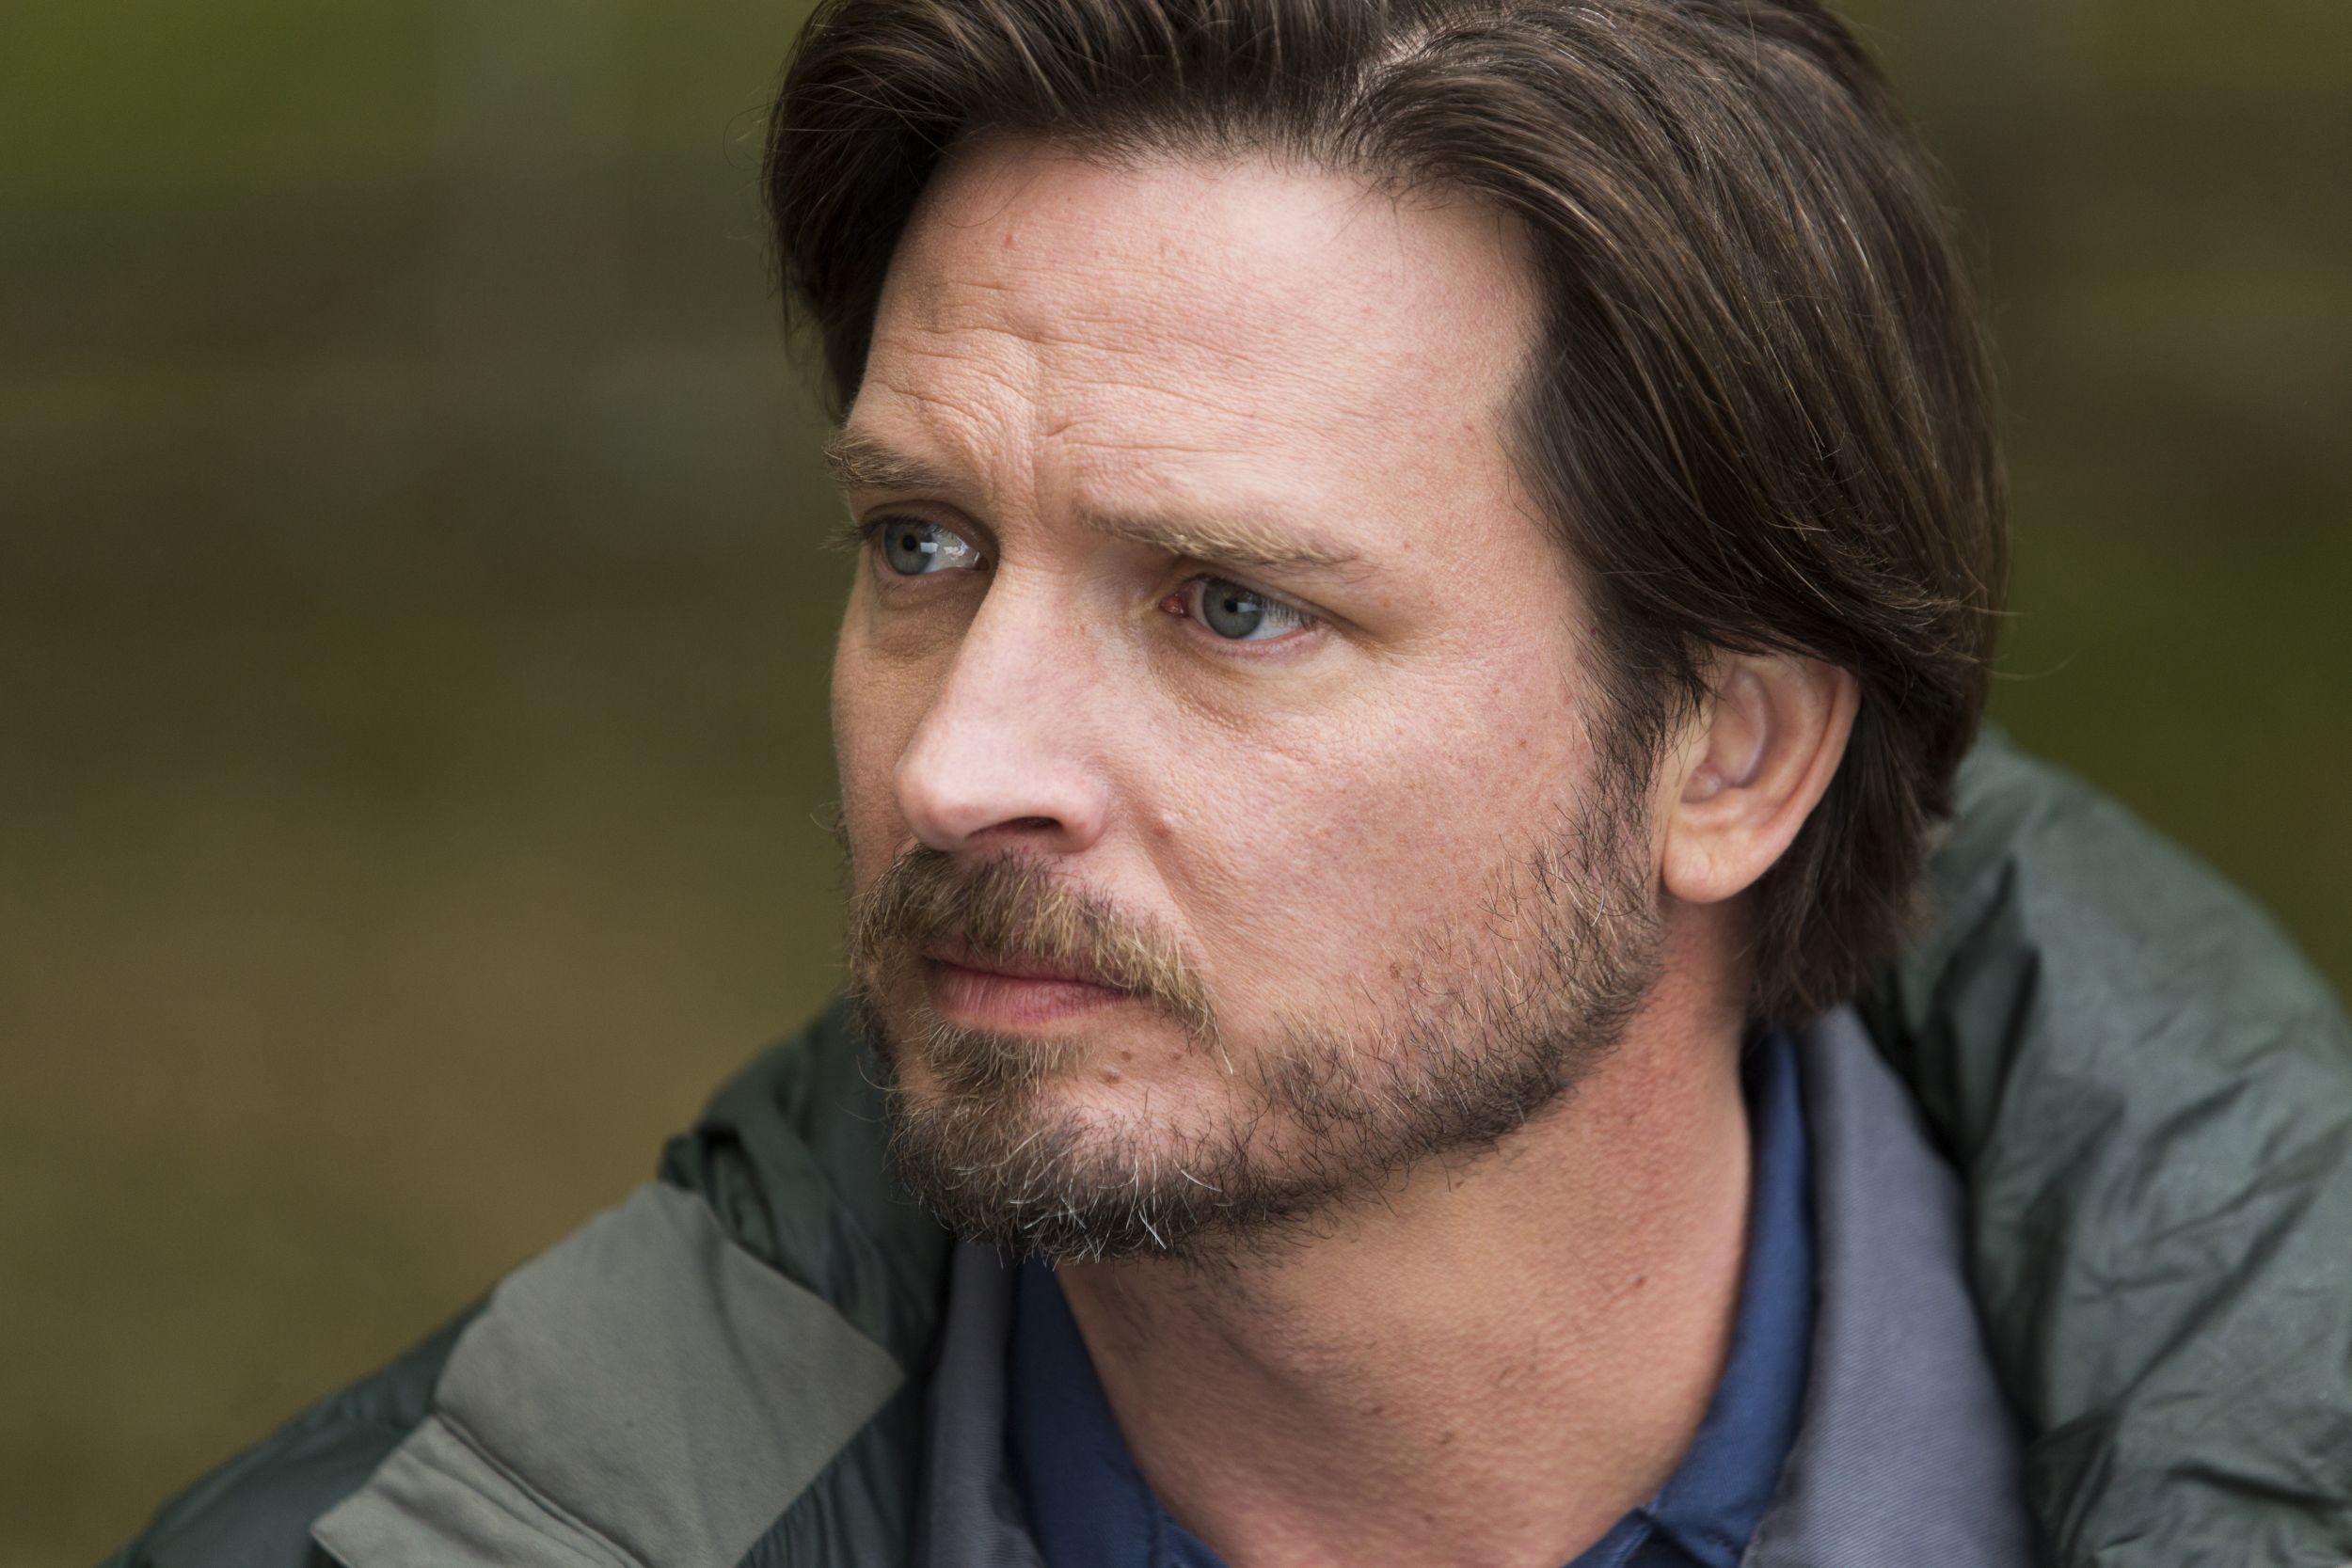 rectify-04x01-a-house-divided-01